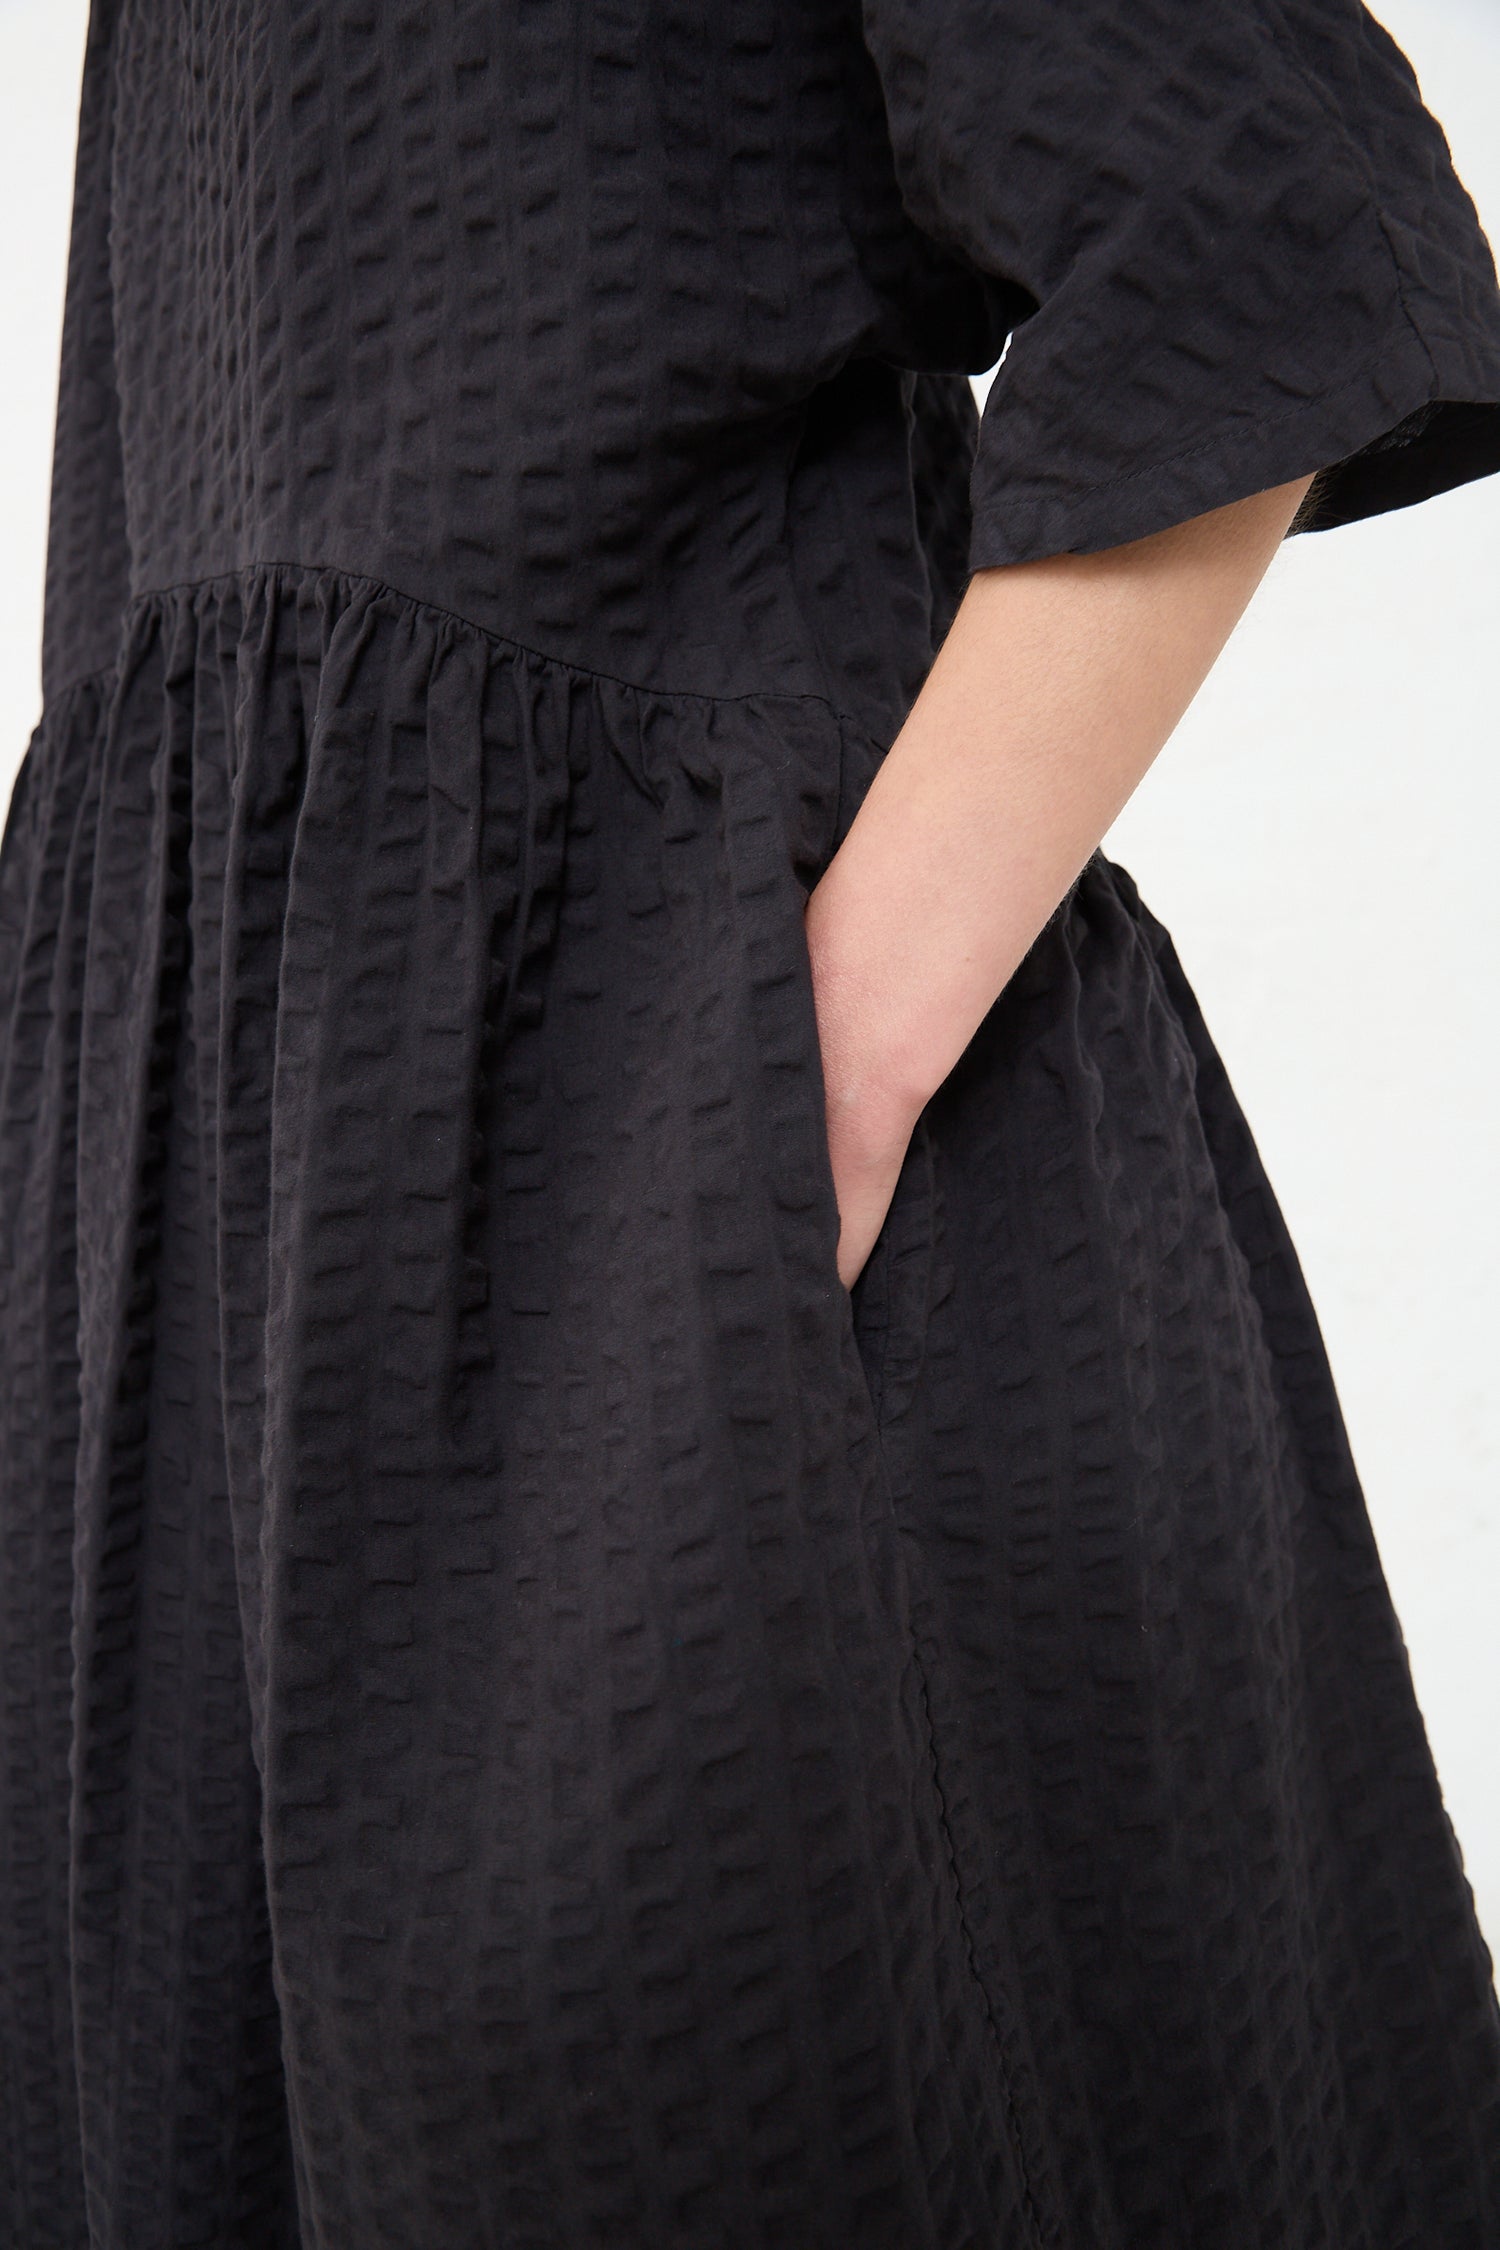 A person is wearing a Cotton Seersucker Tradi Dress in Ink Black by Black Crane with a cinched waist detail. Only the torso and part of the arm are visible in the frame.